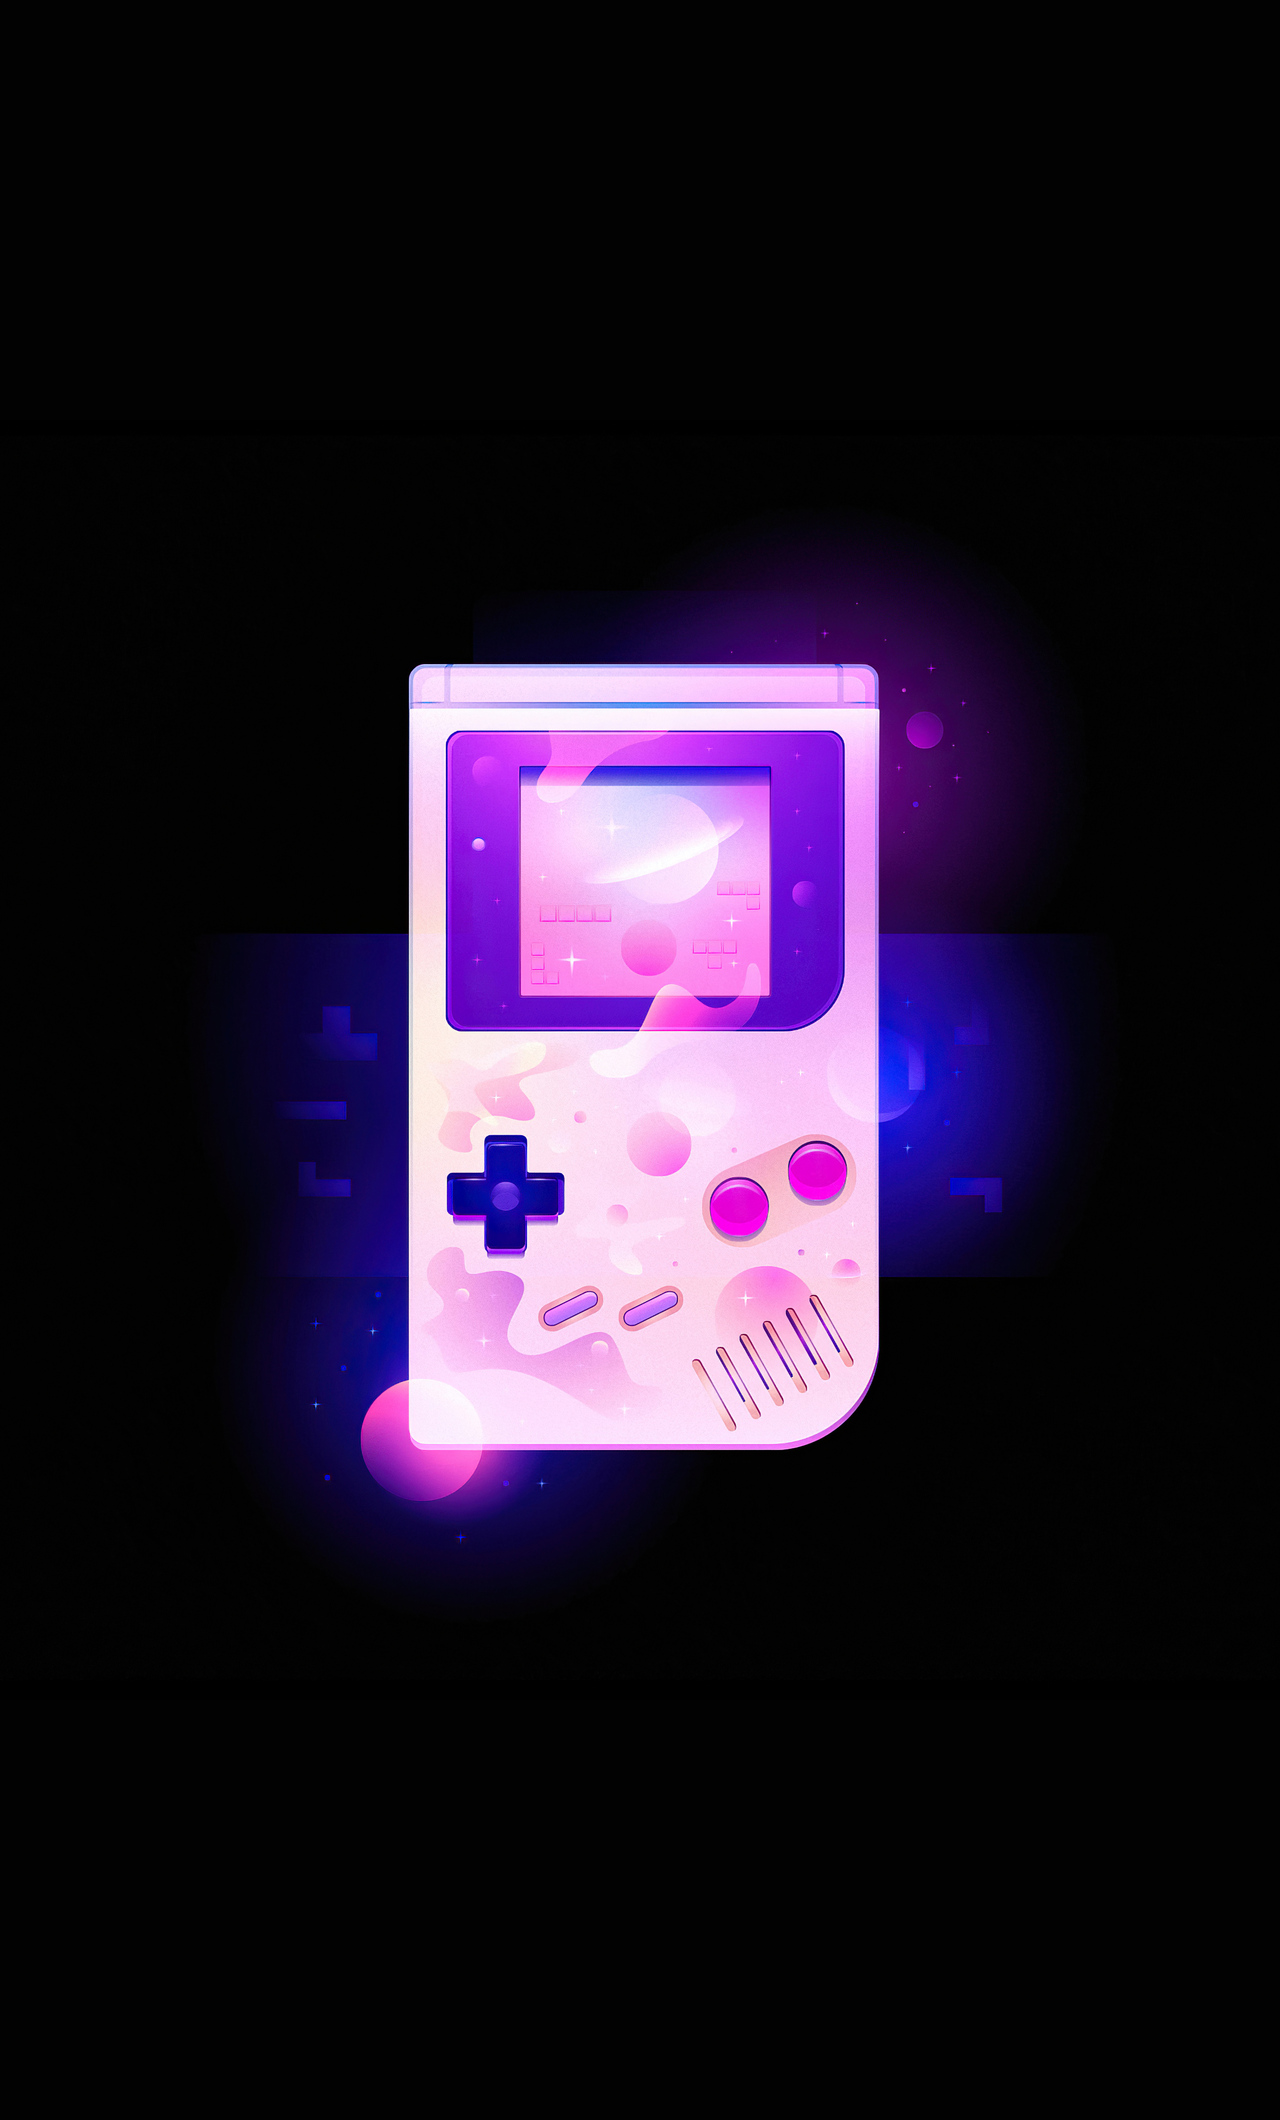 1280x21 Gameboy Retro Style 4k Iphone 6 Hd 4k Wallpapers Images Backgrounds Photos And Pictures